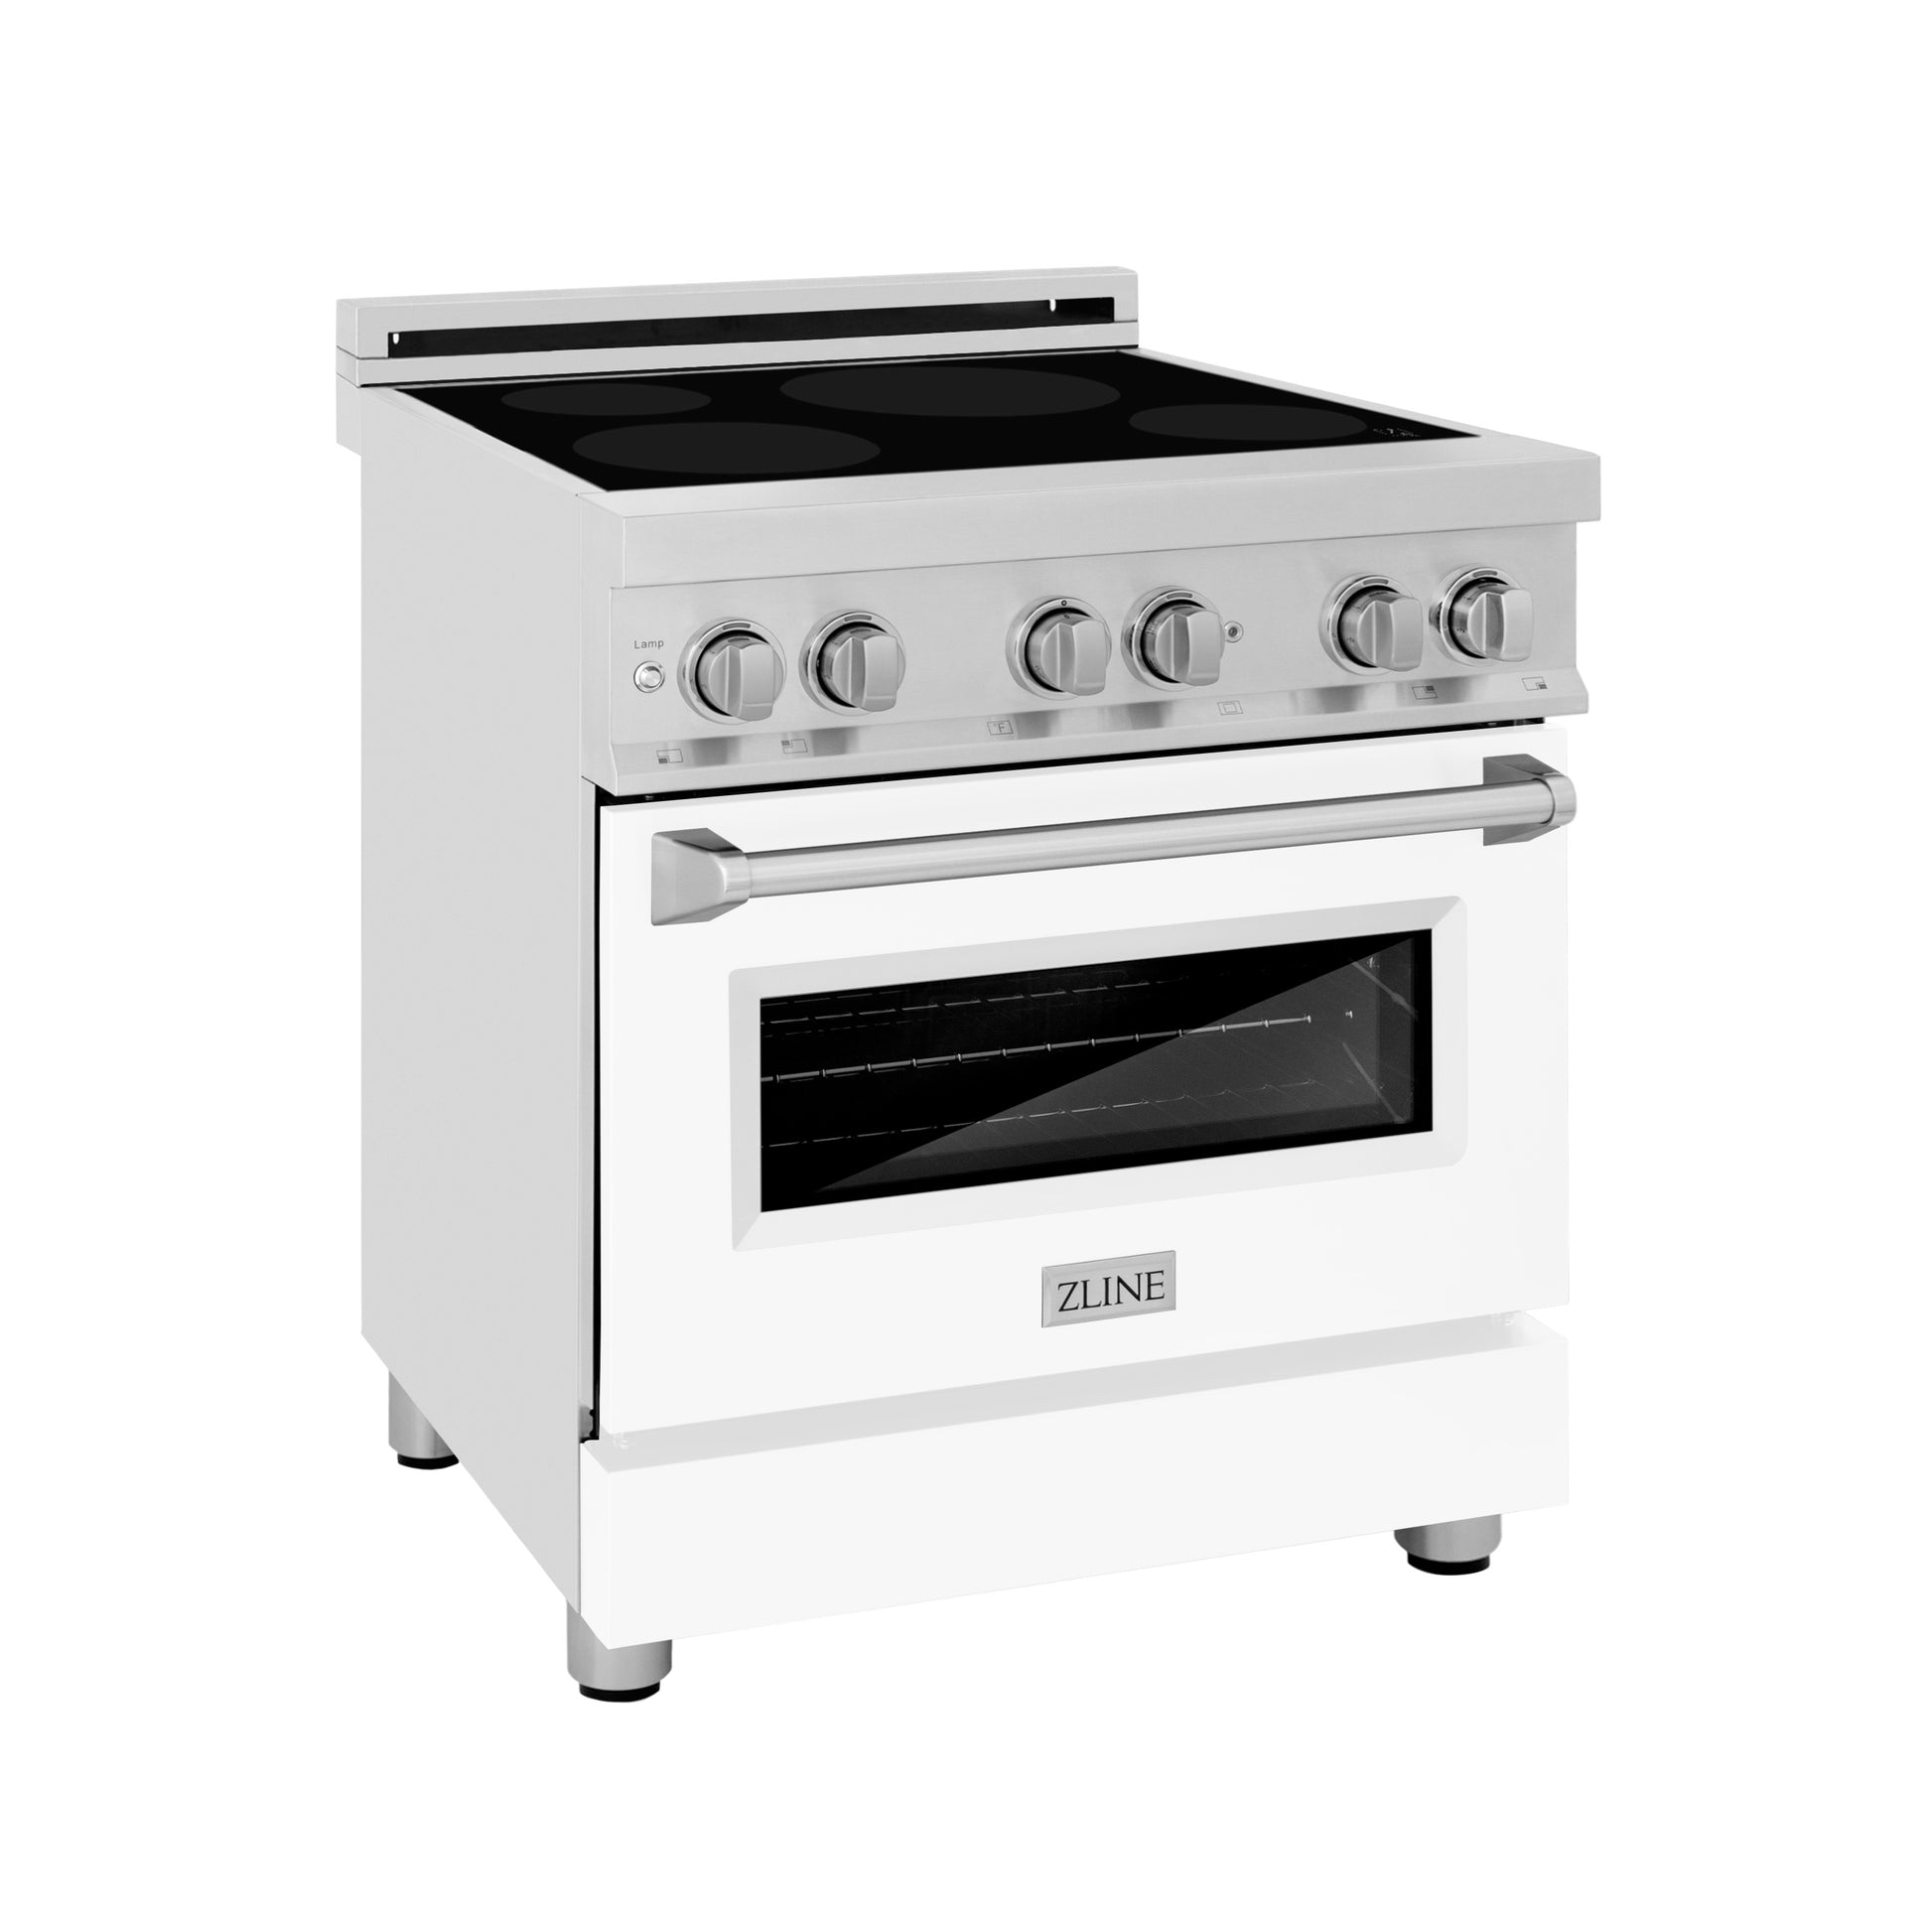 ZLINE 30 in. 4.0 cu. ft. Induction Range with a 4 Induction Element Stove and Electric Oven in Stainless Steel with White Matte Door (RAIND-WM-30) side, oven closed.